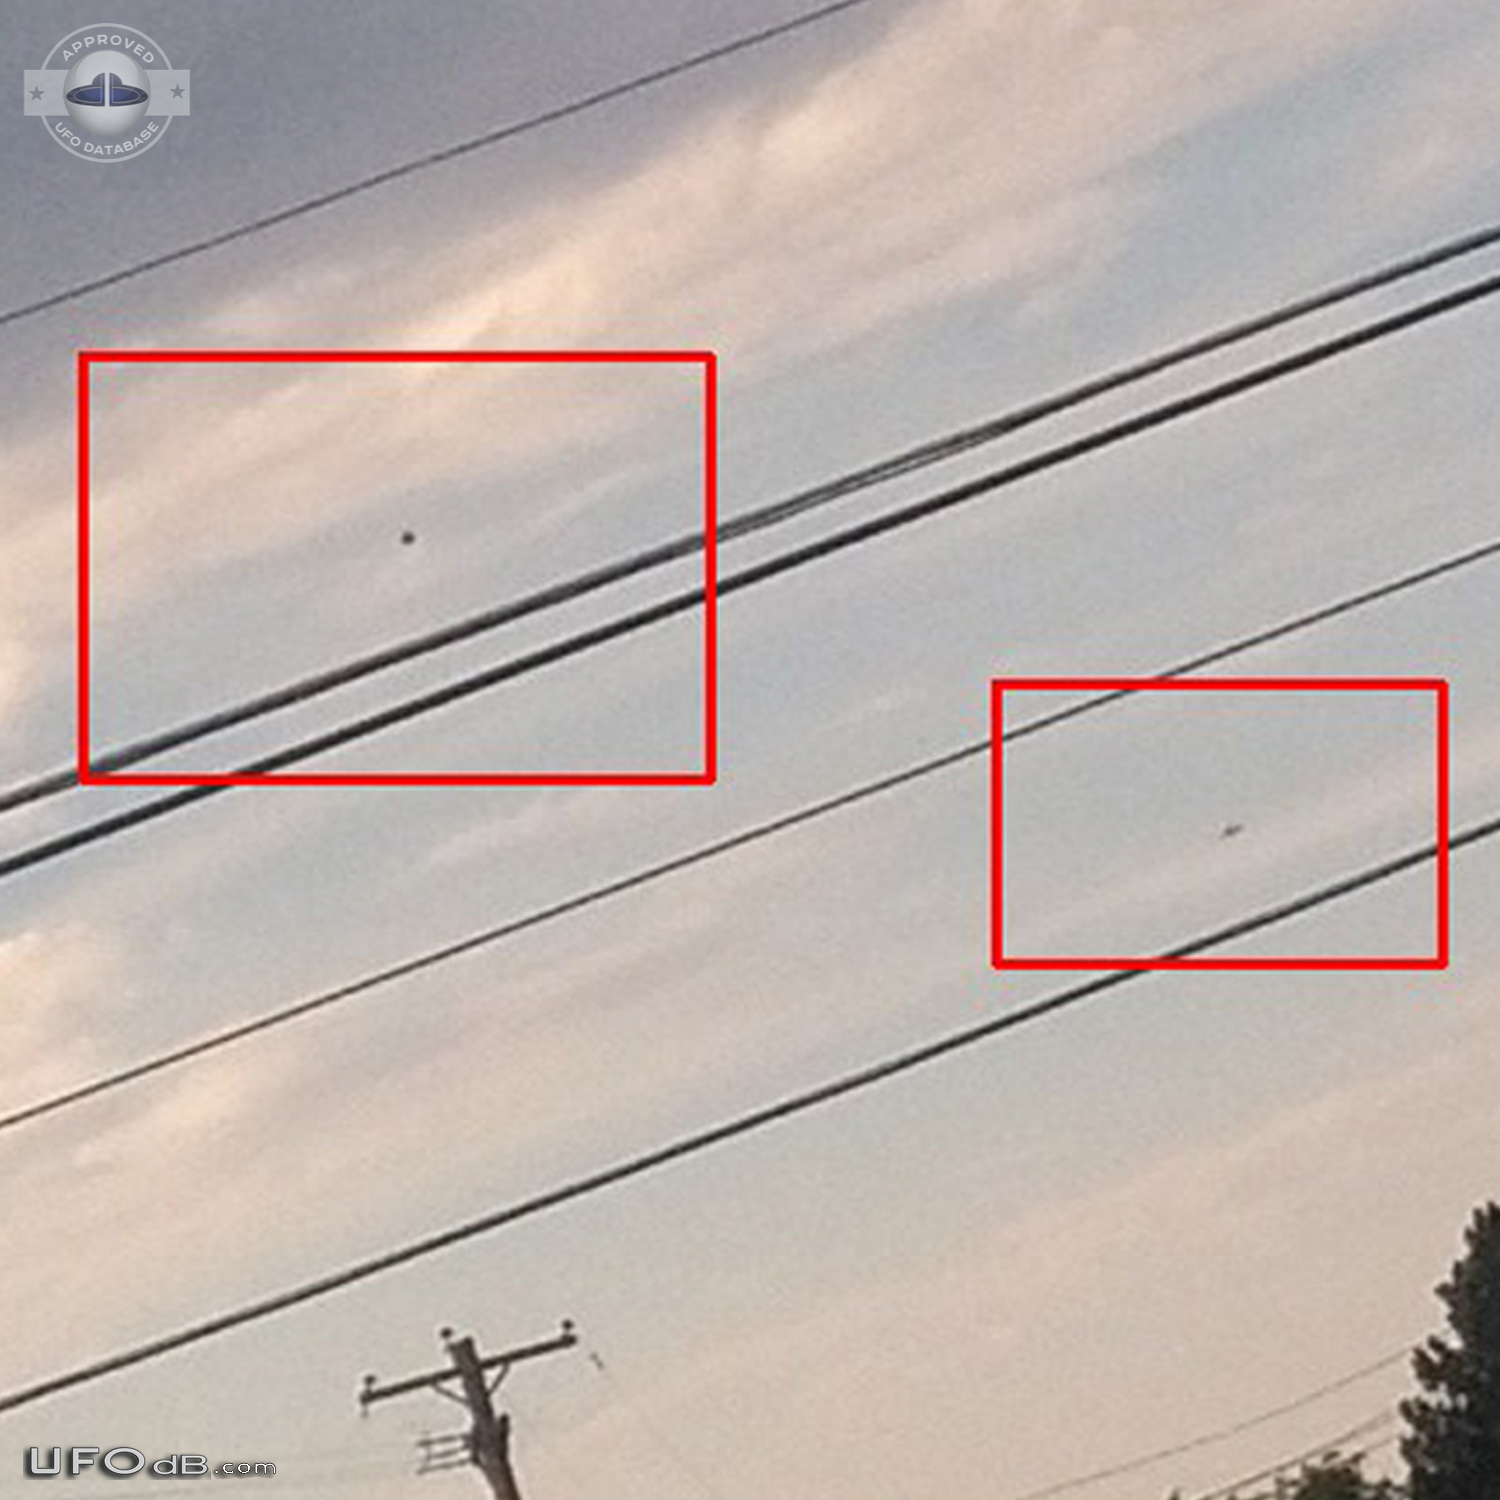 Stationary black orb observed while stuck in traffic in Aurora Colorad UFO Picture #848-2